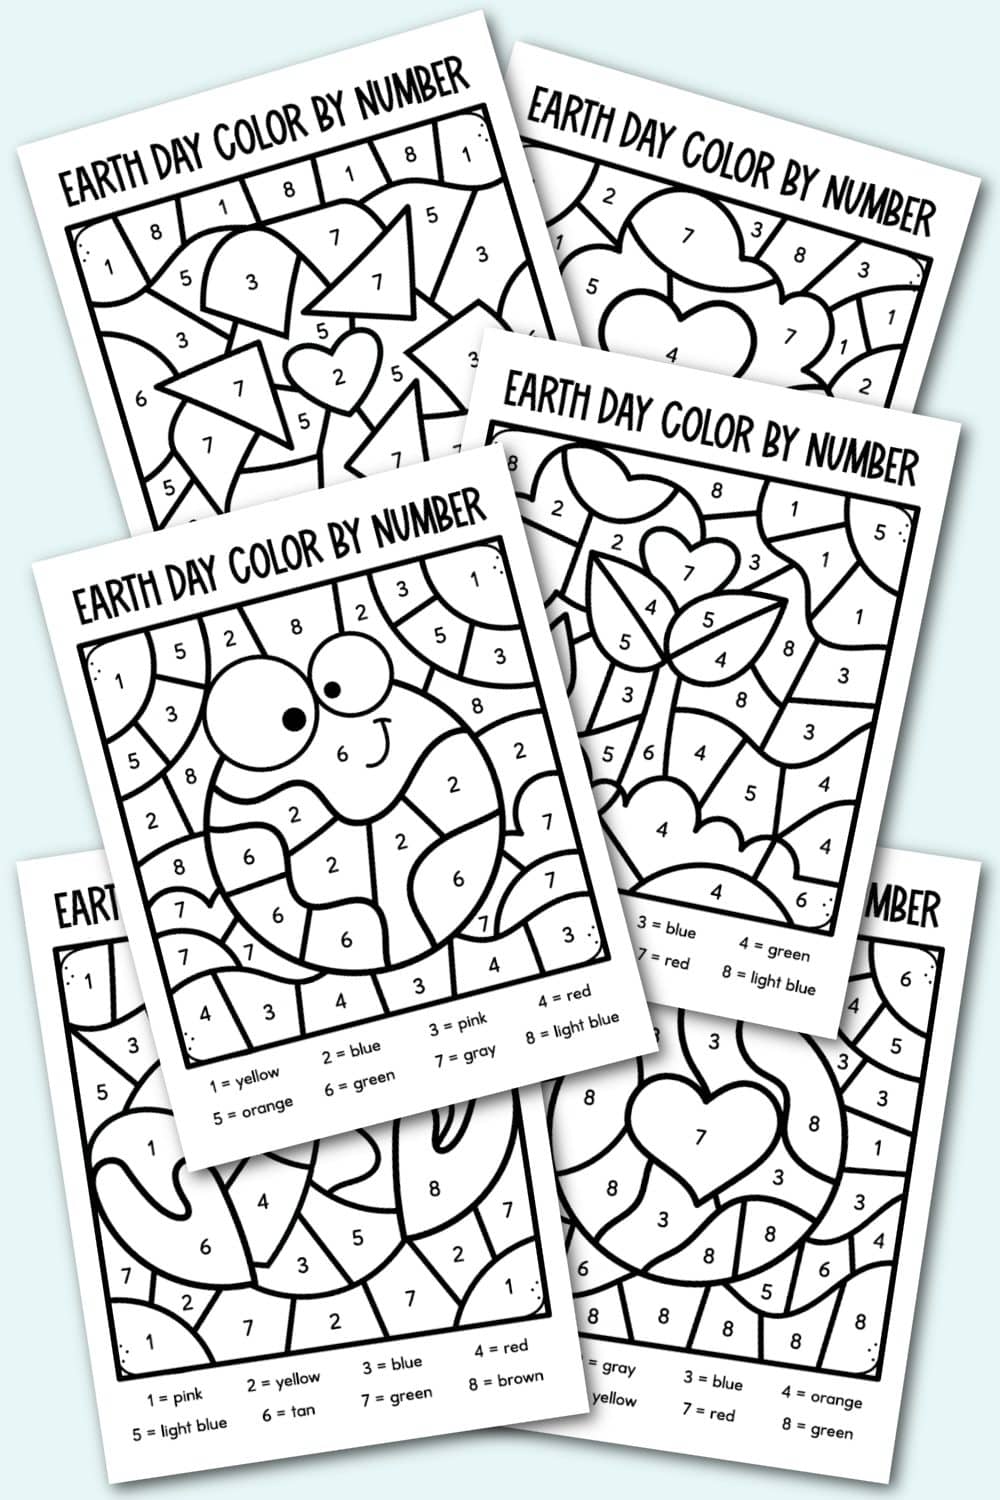 Free Earth Day Color by Number Printables